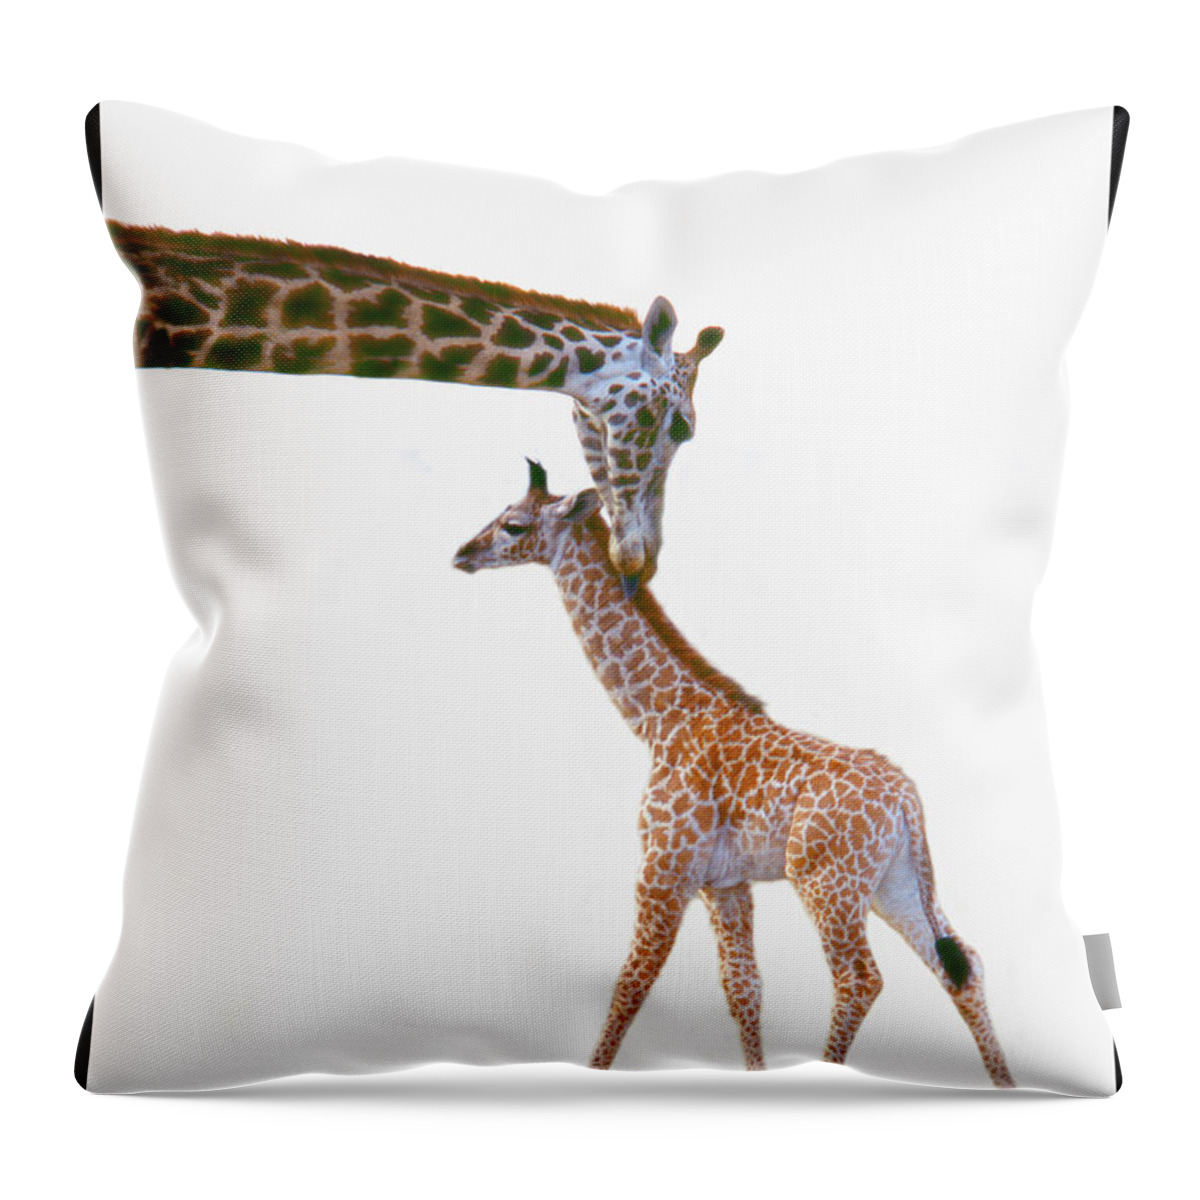 White Background Throw Pillow featuring the photograph Baby Giraffe With Mother by Grant Faint